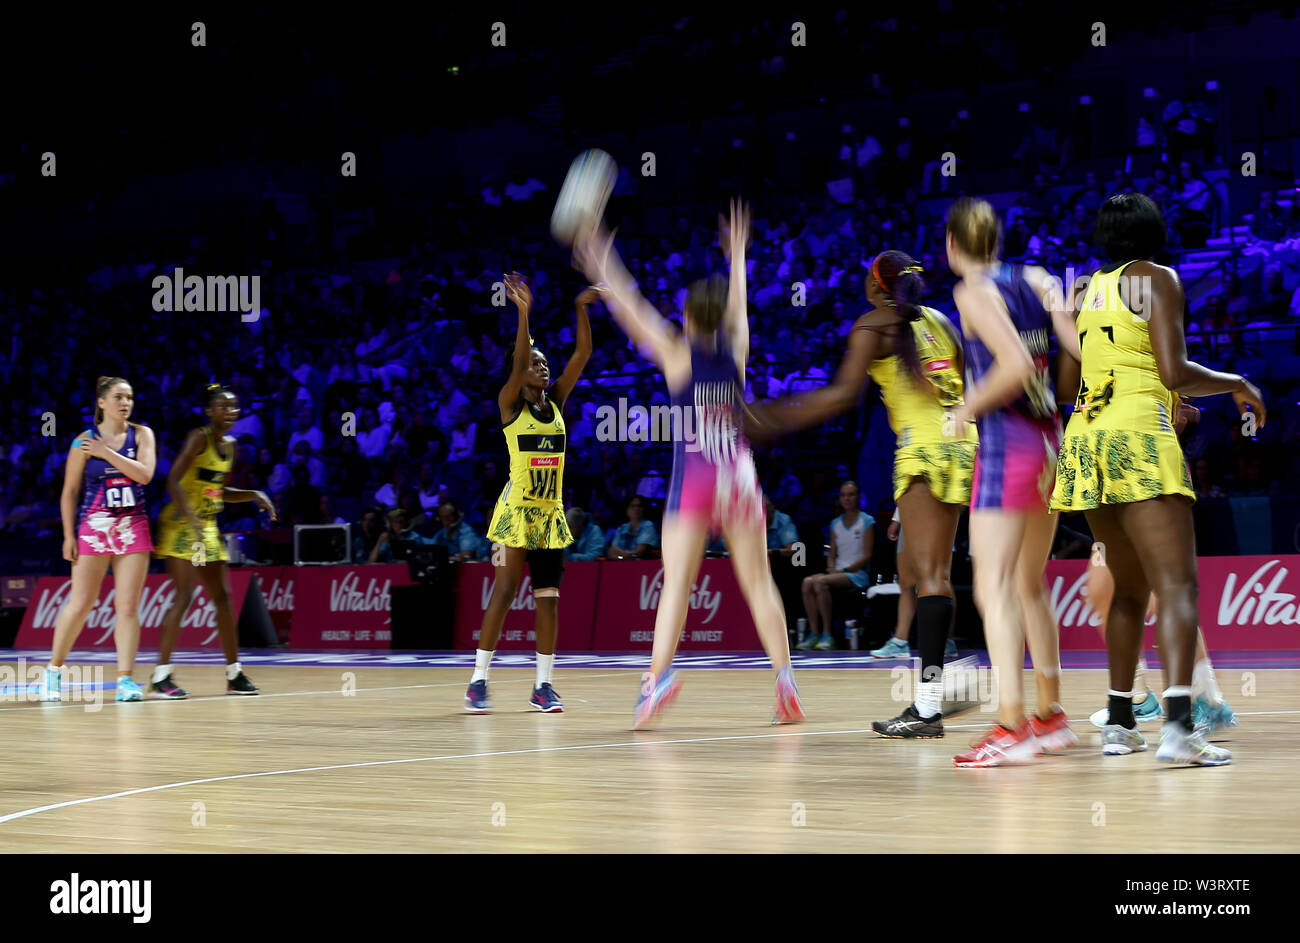 A general view of match action between Jamaica and Scotland during the netball World Cup match at the M&S Bank Arena, Liverpool. Stock Photo